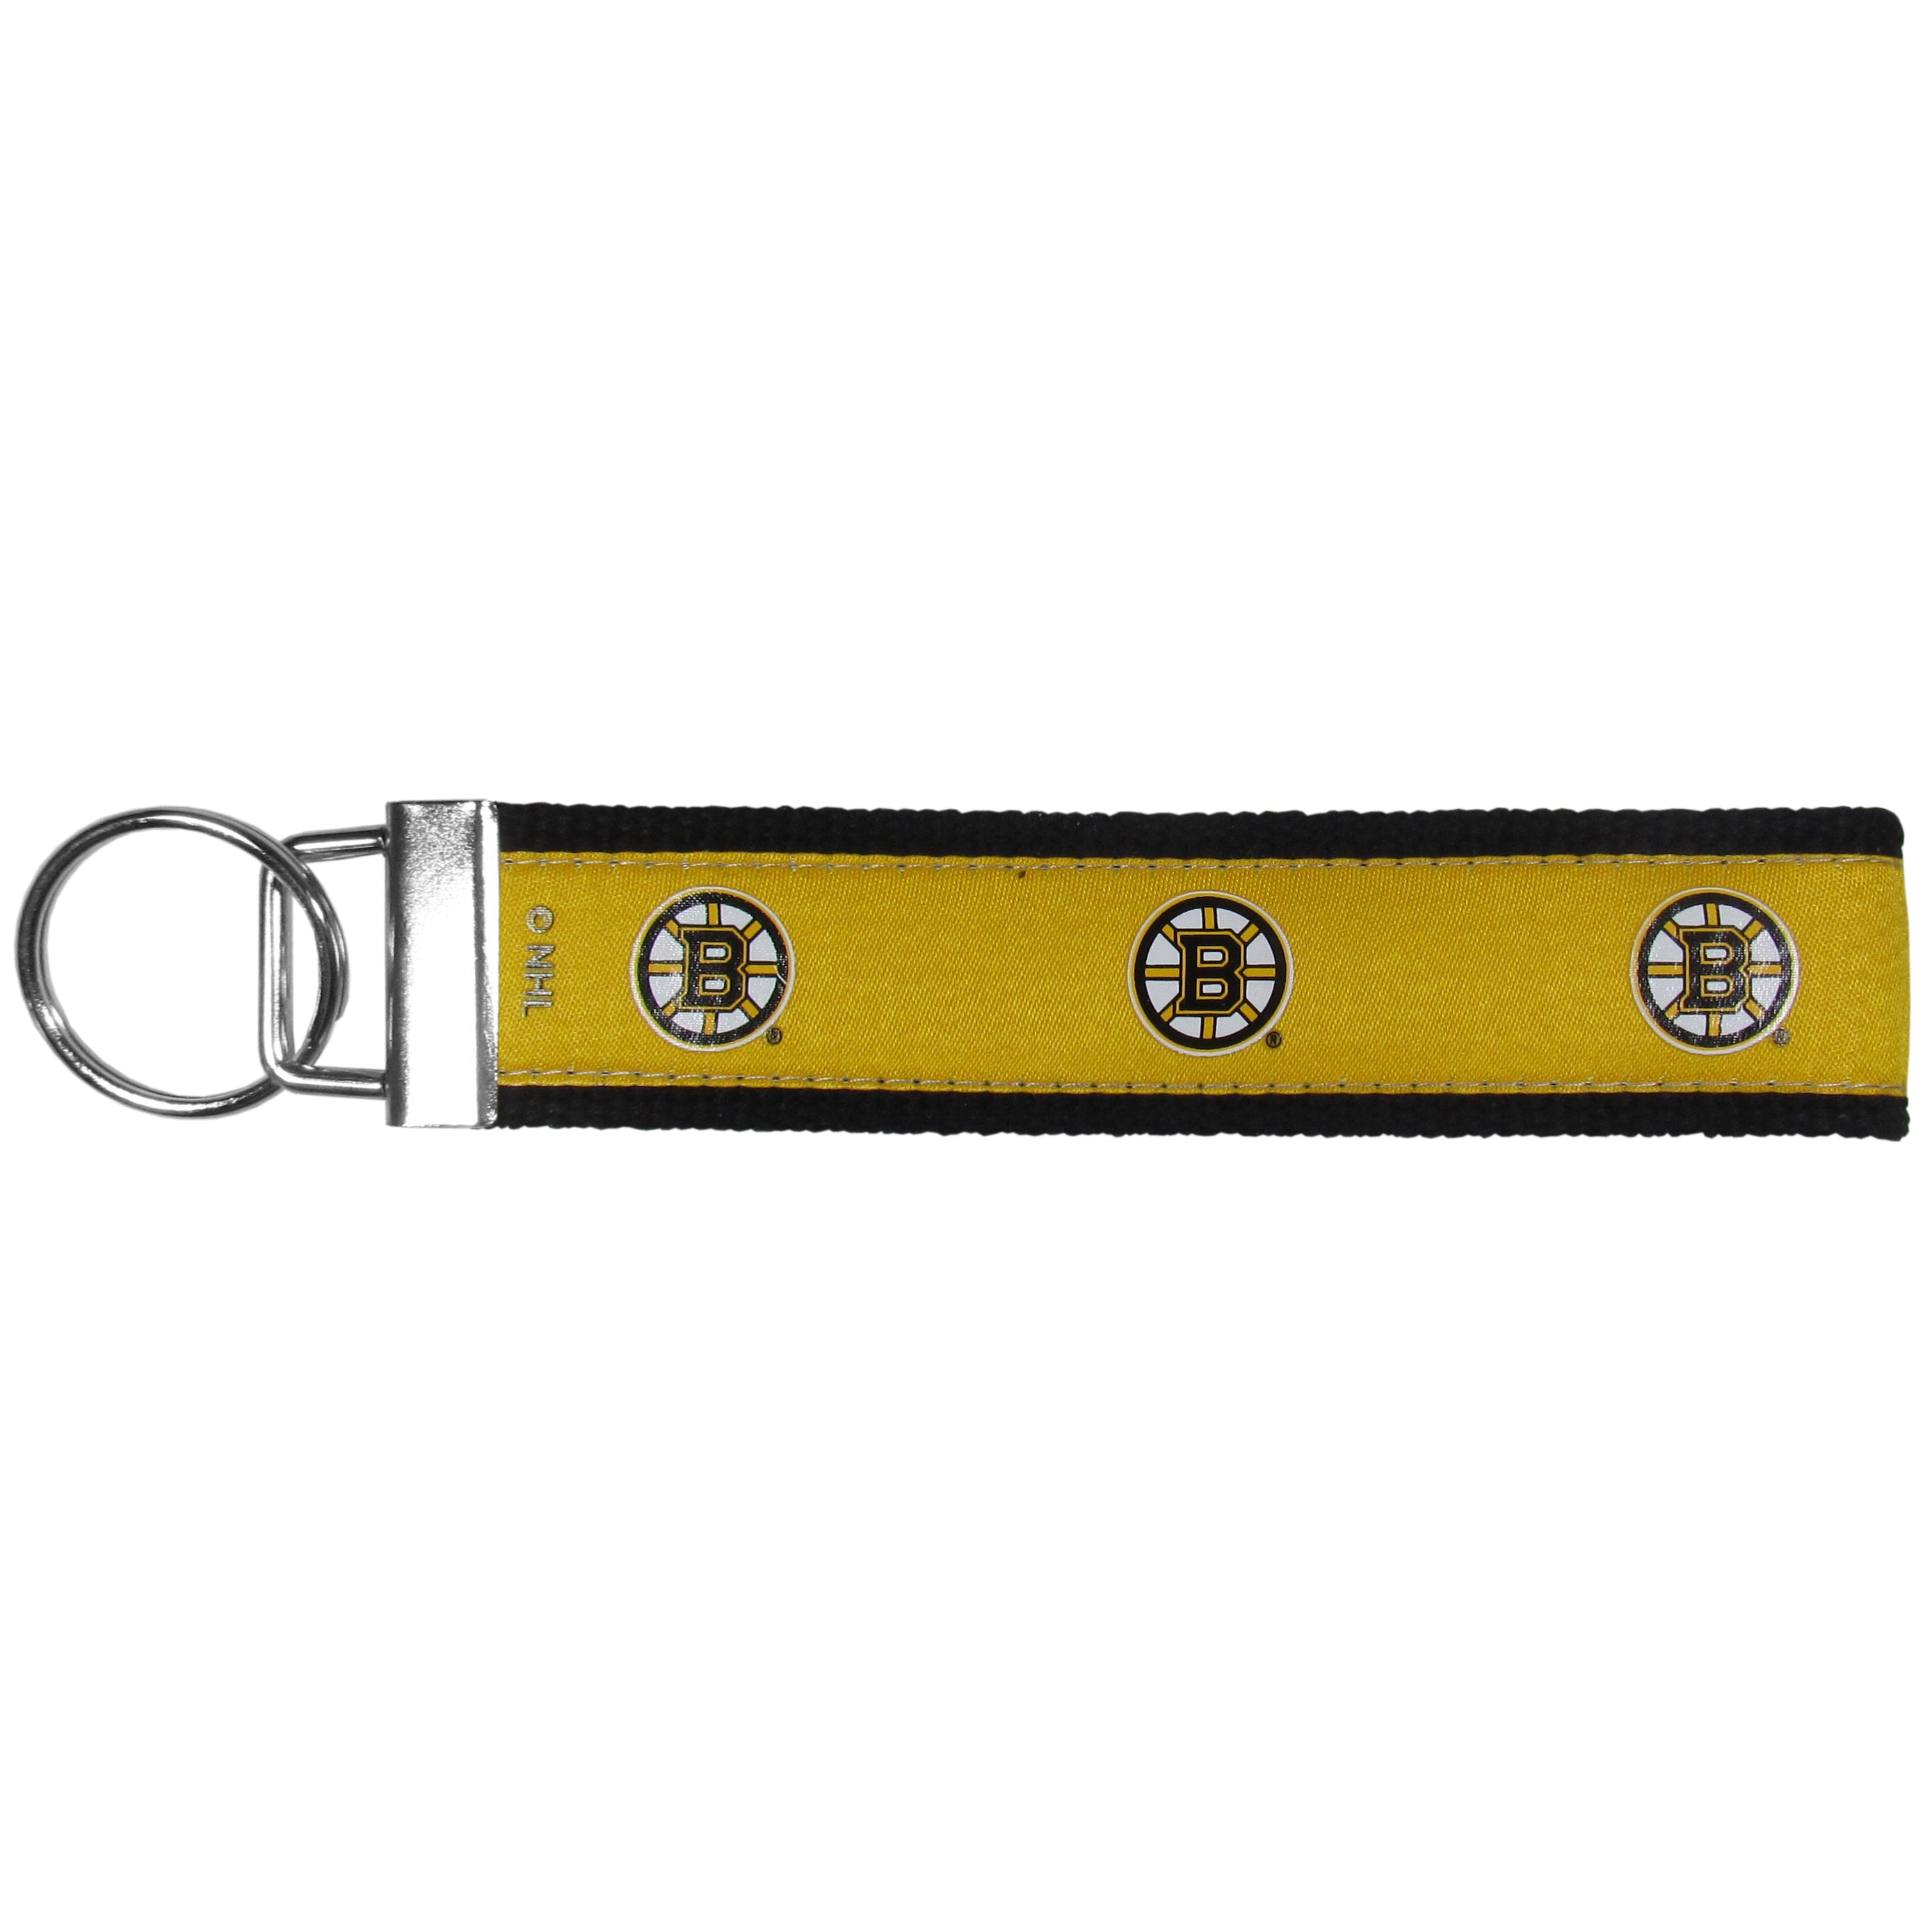  NHL Siskiyou Sports Fan Shop Boston Bruins Chip Clip Magnet  with Bottle Opener Single Team Color : Sports & Outdoors